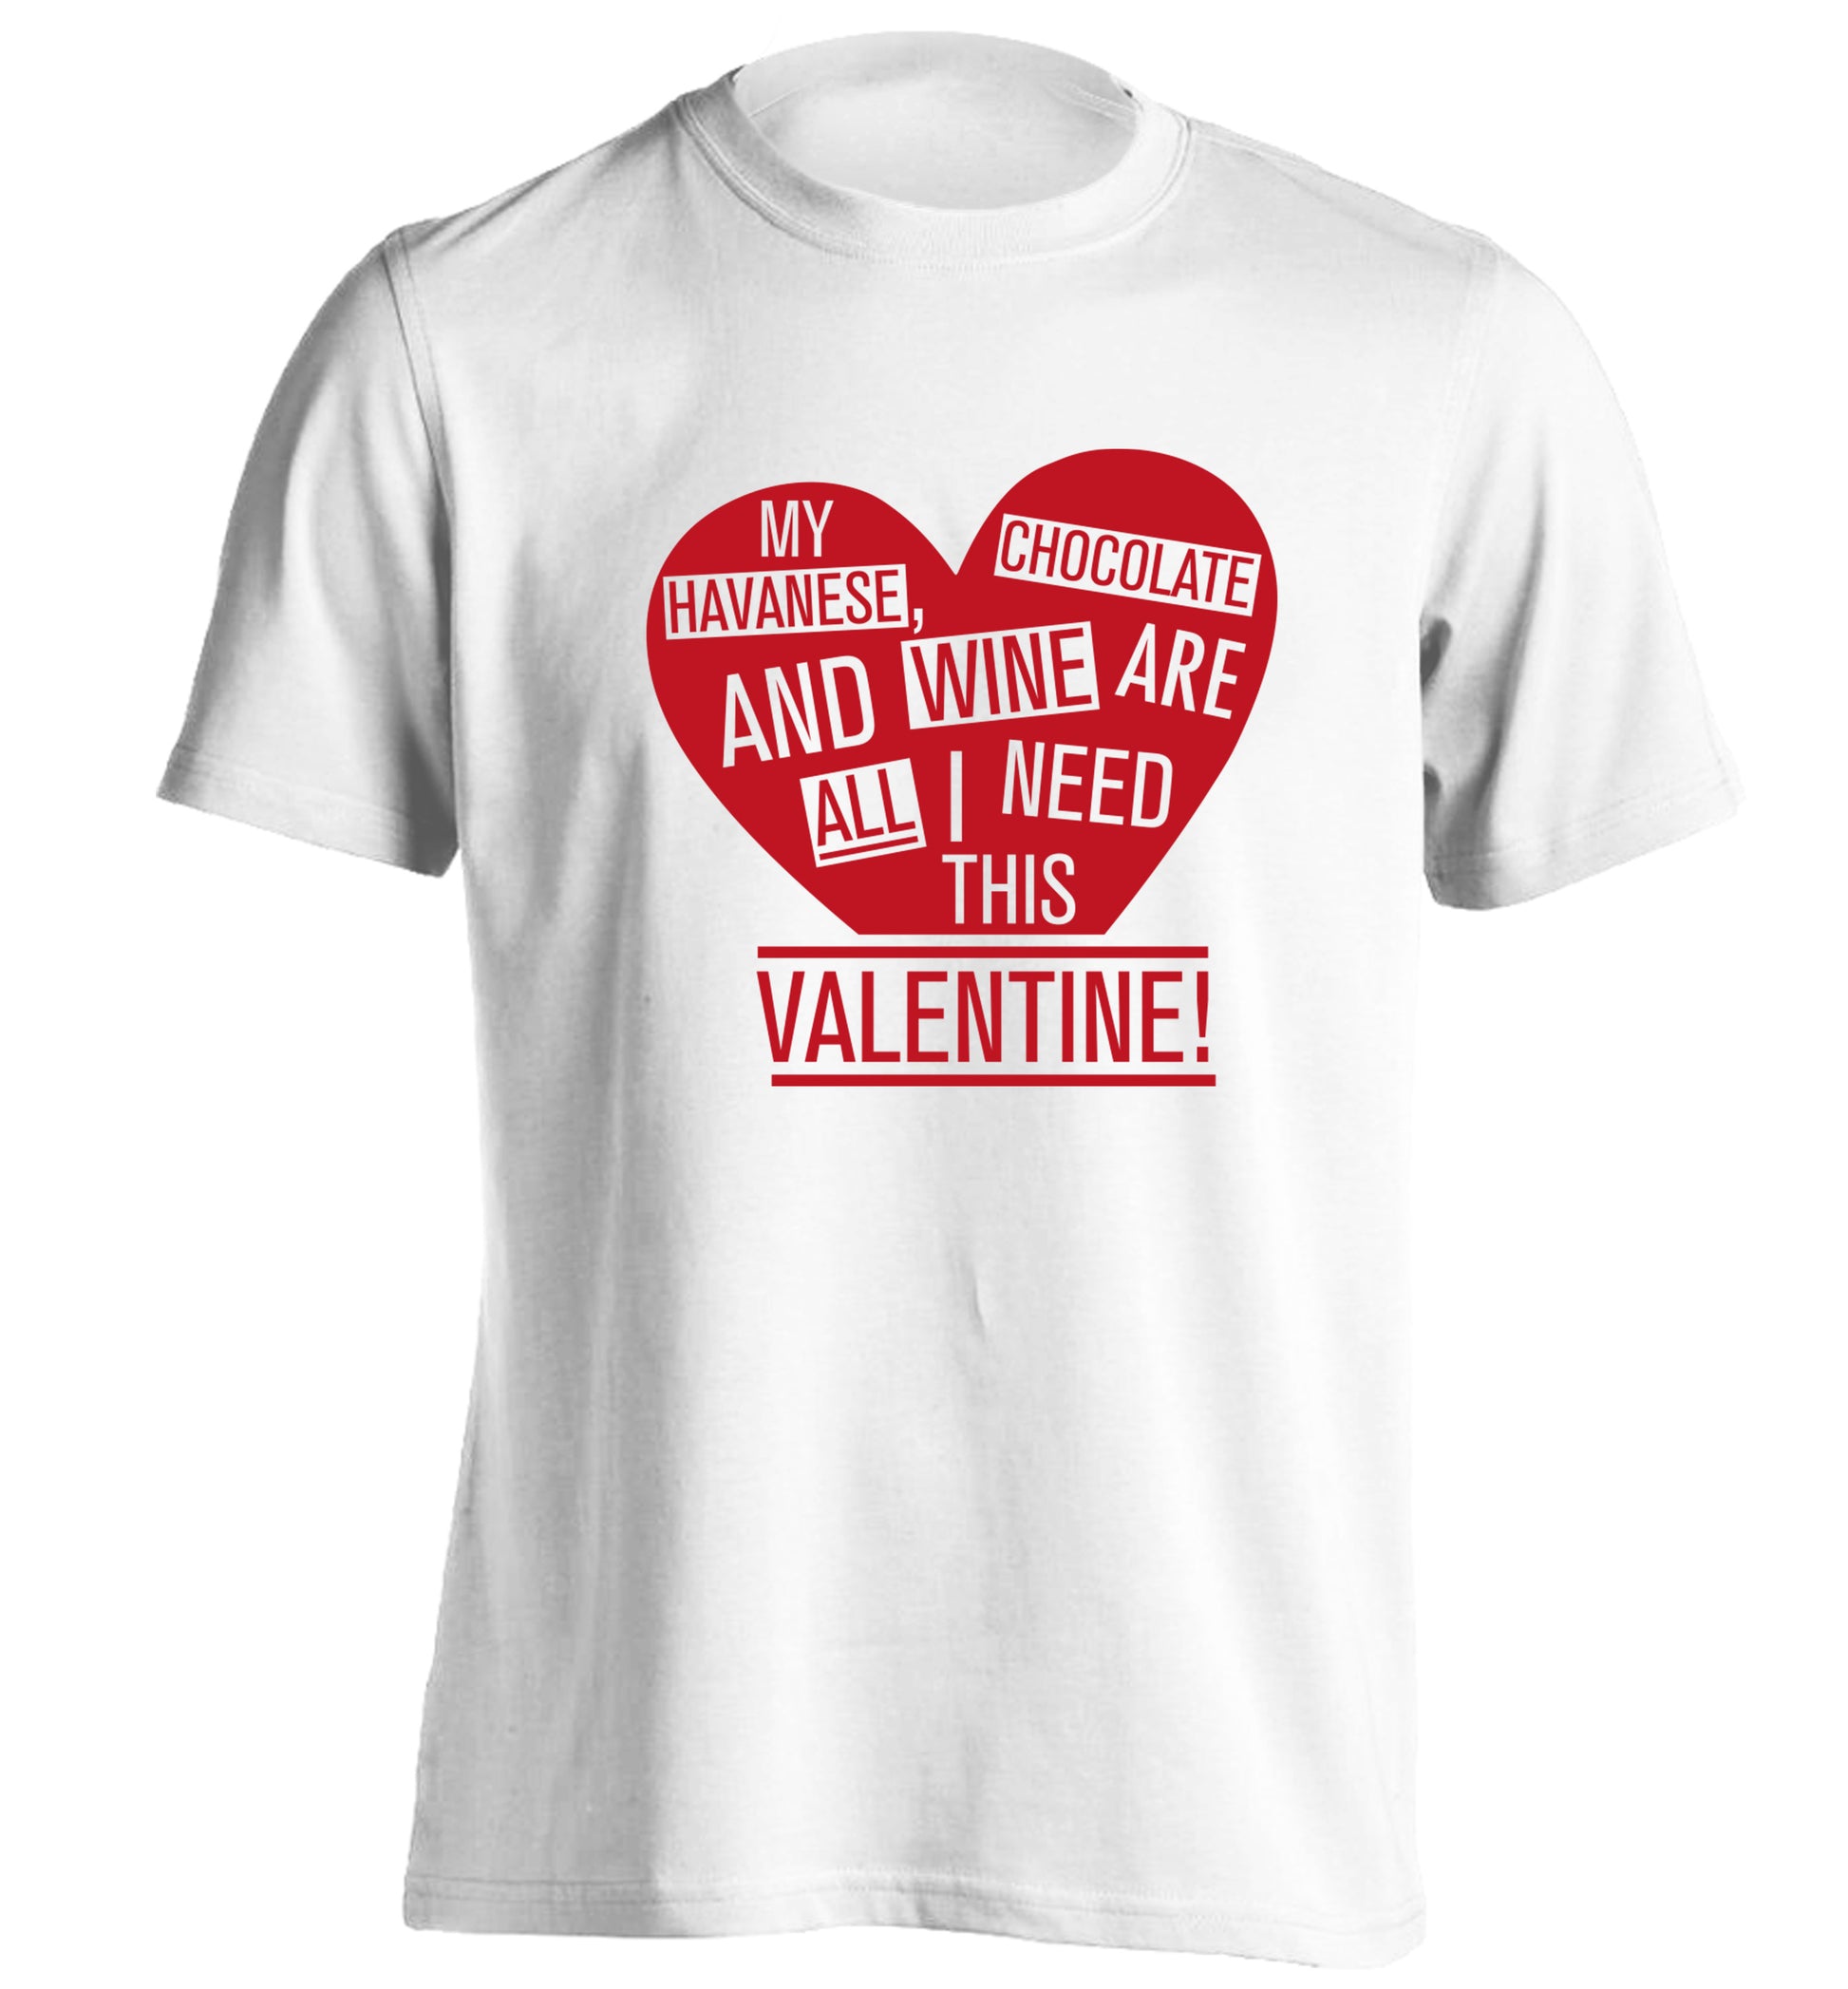 My havanese, chocolate and wine are all I need this valentine! adults unisex white Tshirt 2XL